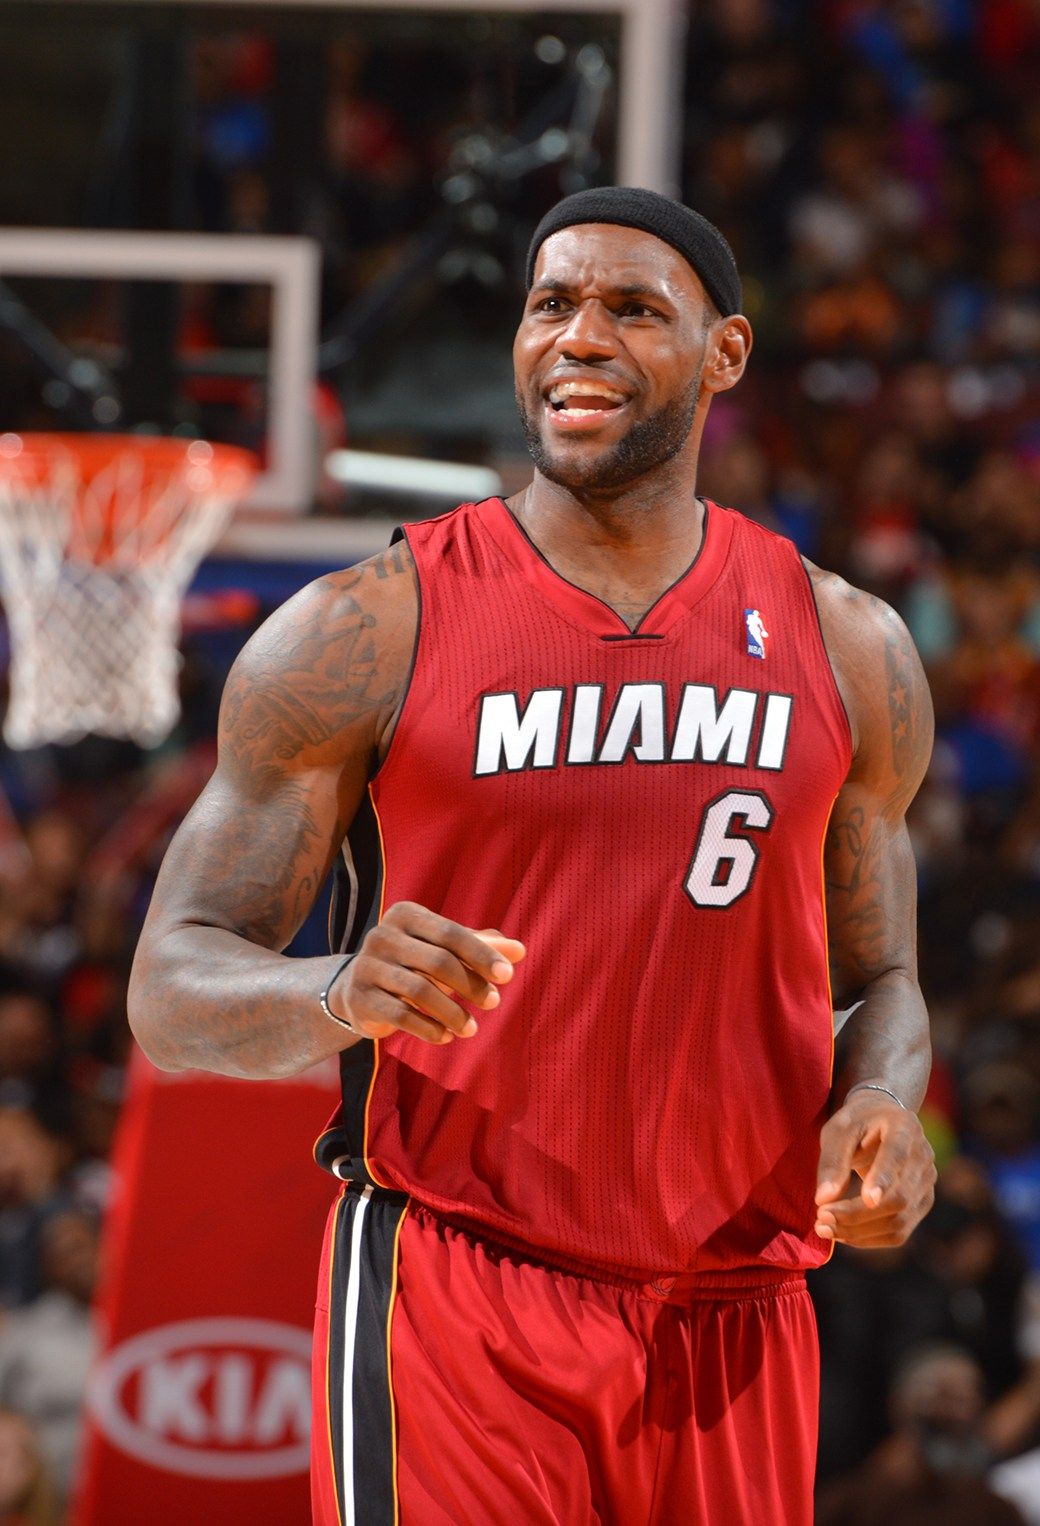 Lebron James Wallpaper for iPhone Pro Max, X, 6